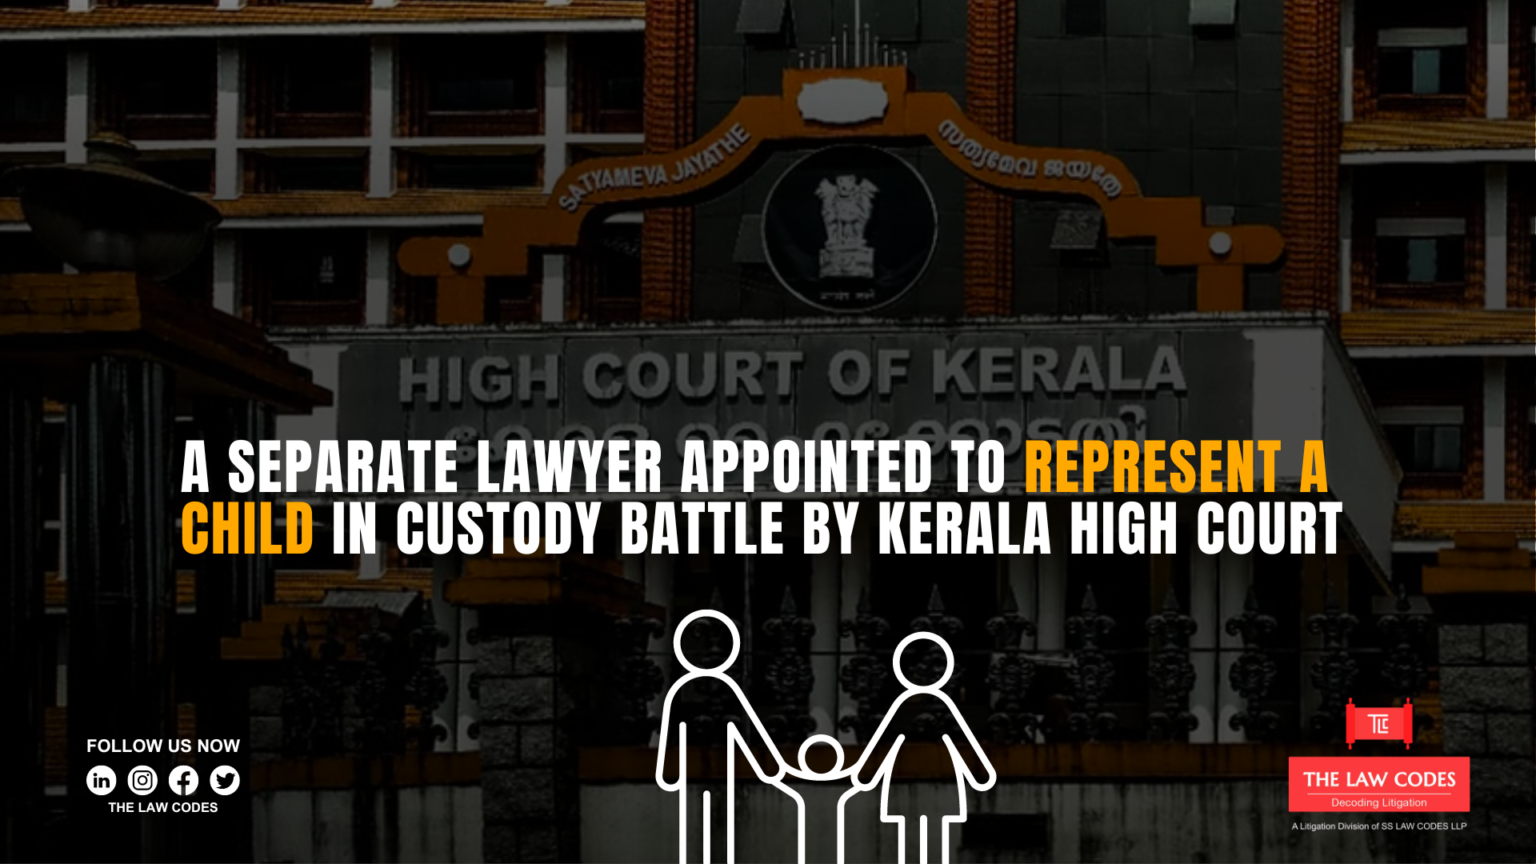 A separate lawyer appointed to represent a child in custody battle by